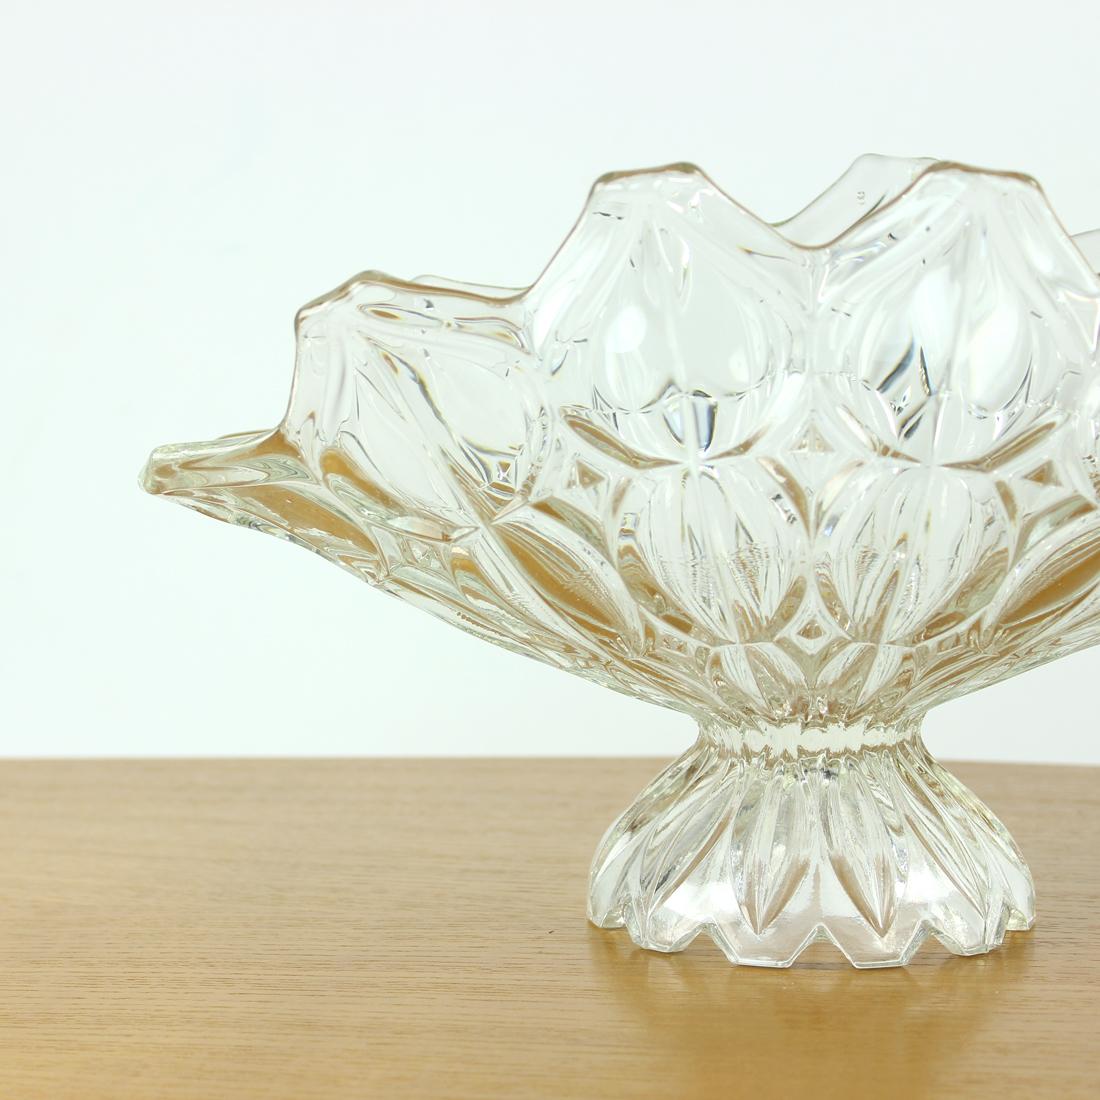 Large Pressed Glass Bowl, Tulip Collection Hermanowa Hut, 1957 For Sale 1